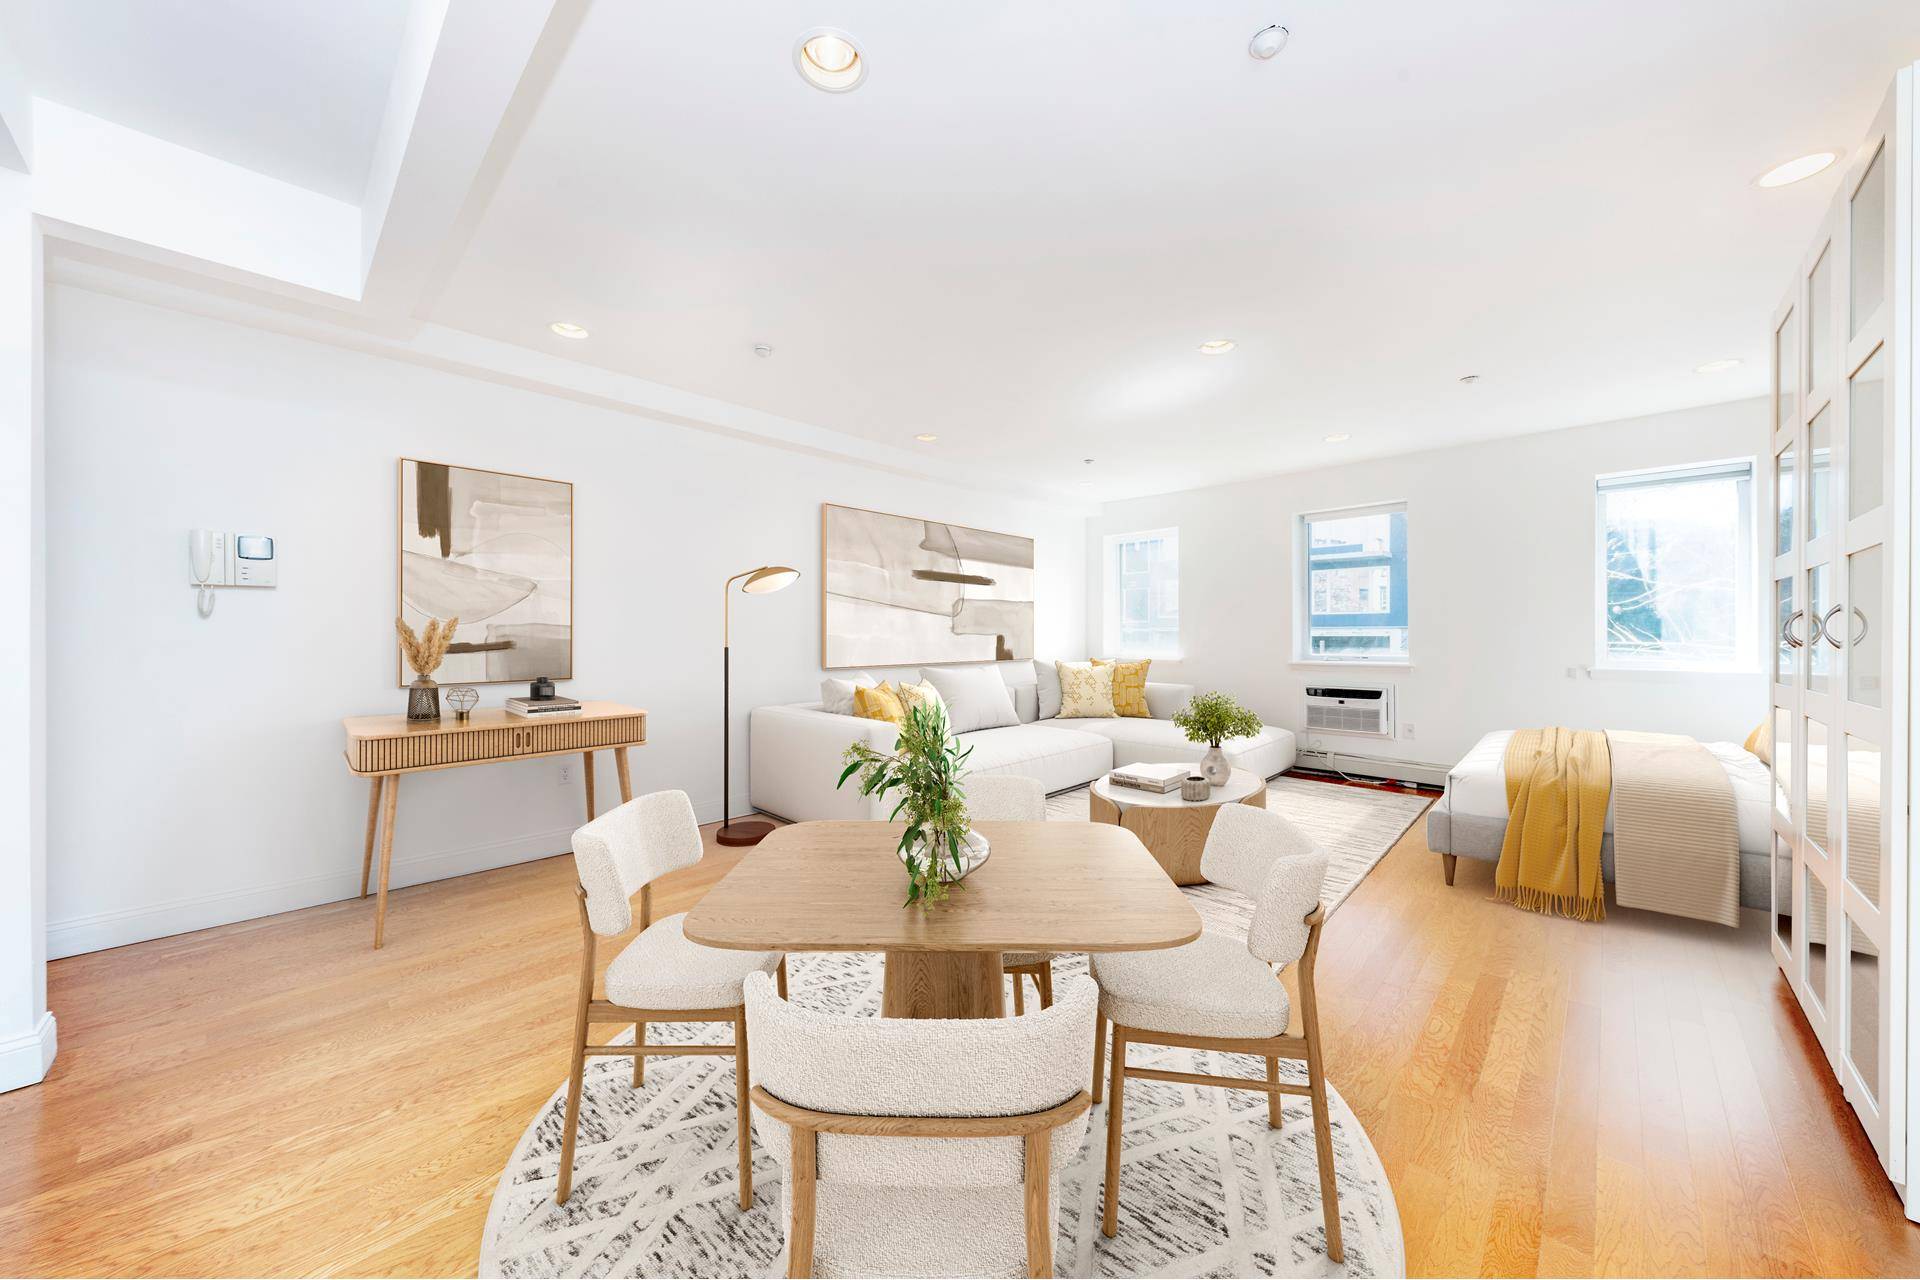 46 Lefferts Place Unit 2B a boutique Condominium on a beautiful townhouse tree lined block in Clinton Hill.